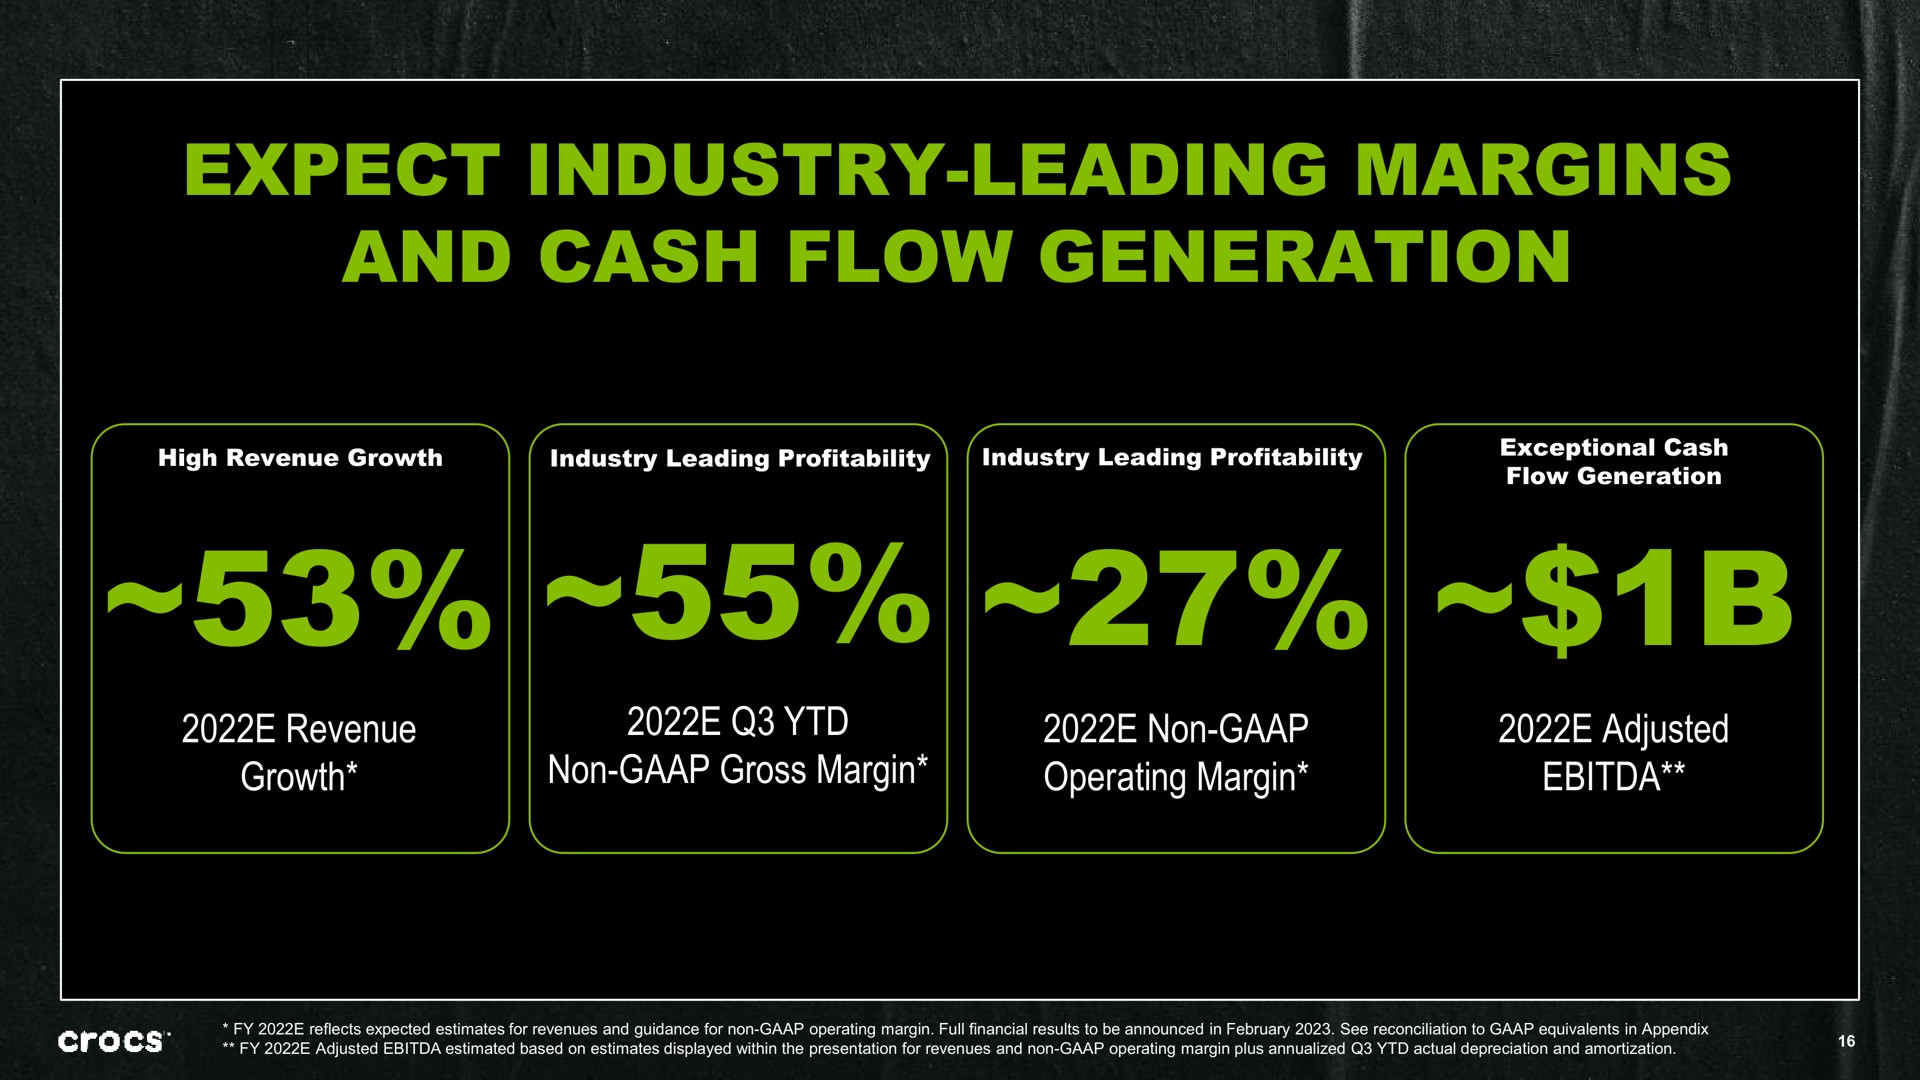 expect industry leading margins and cash flow generation | Crocs